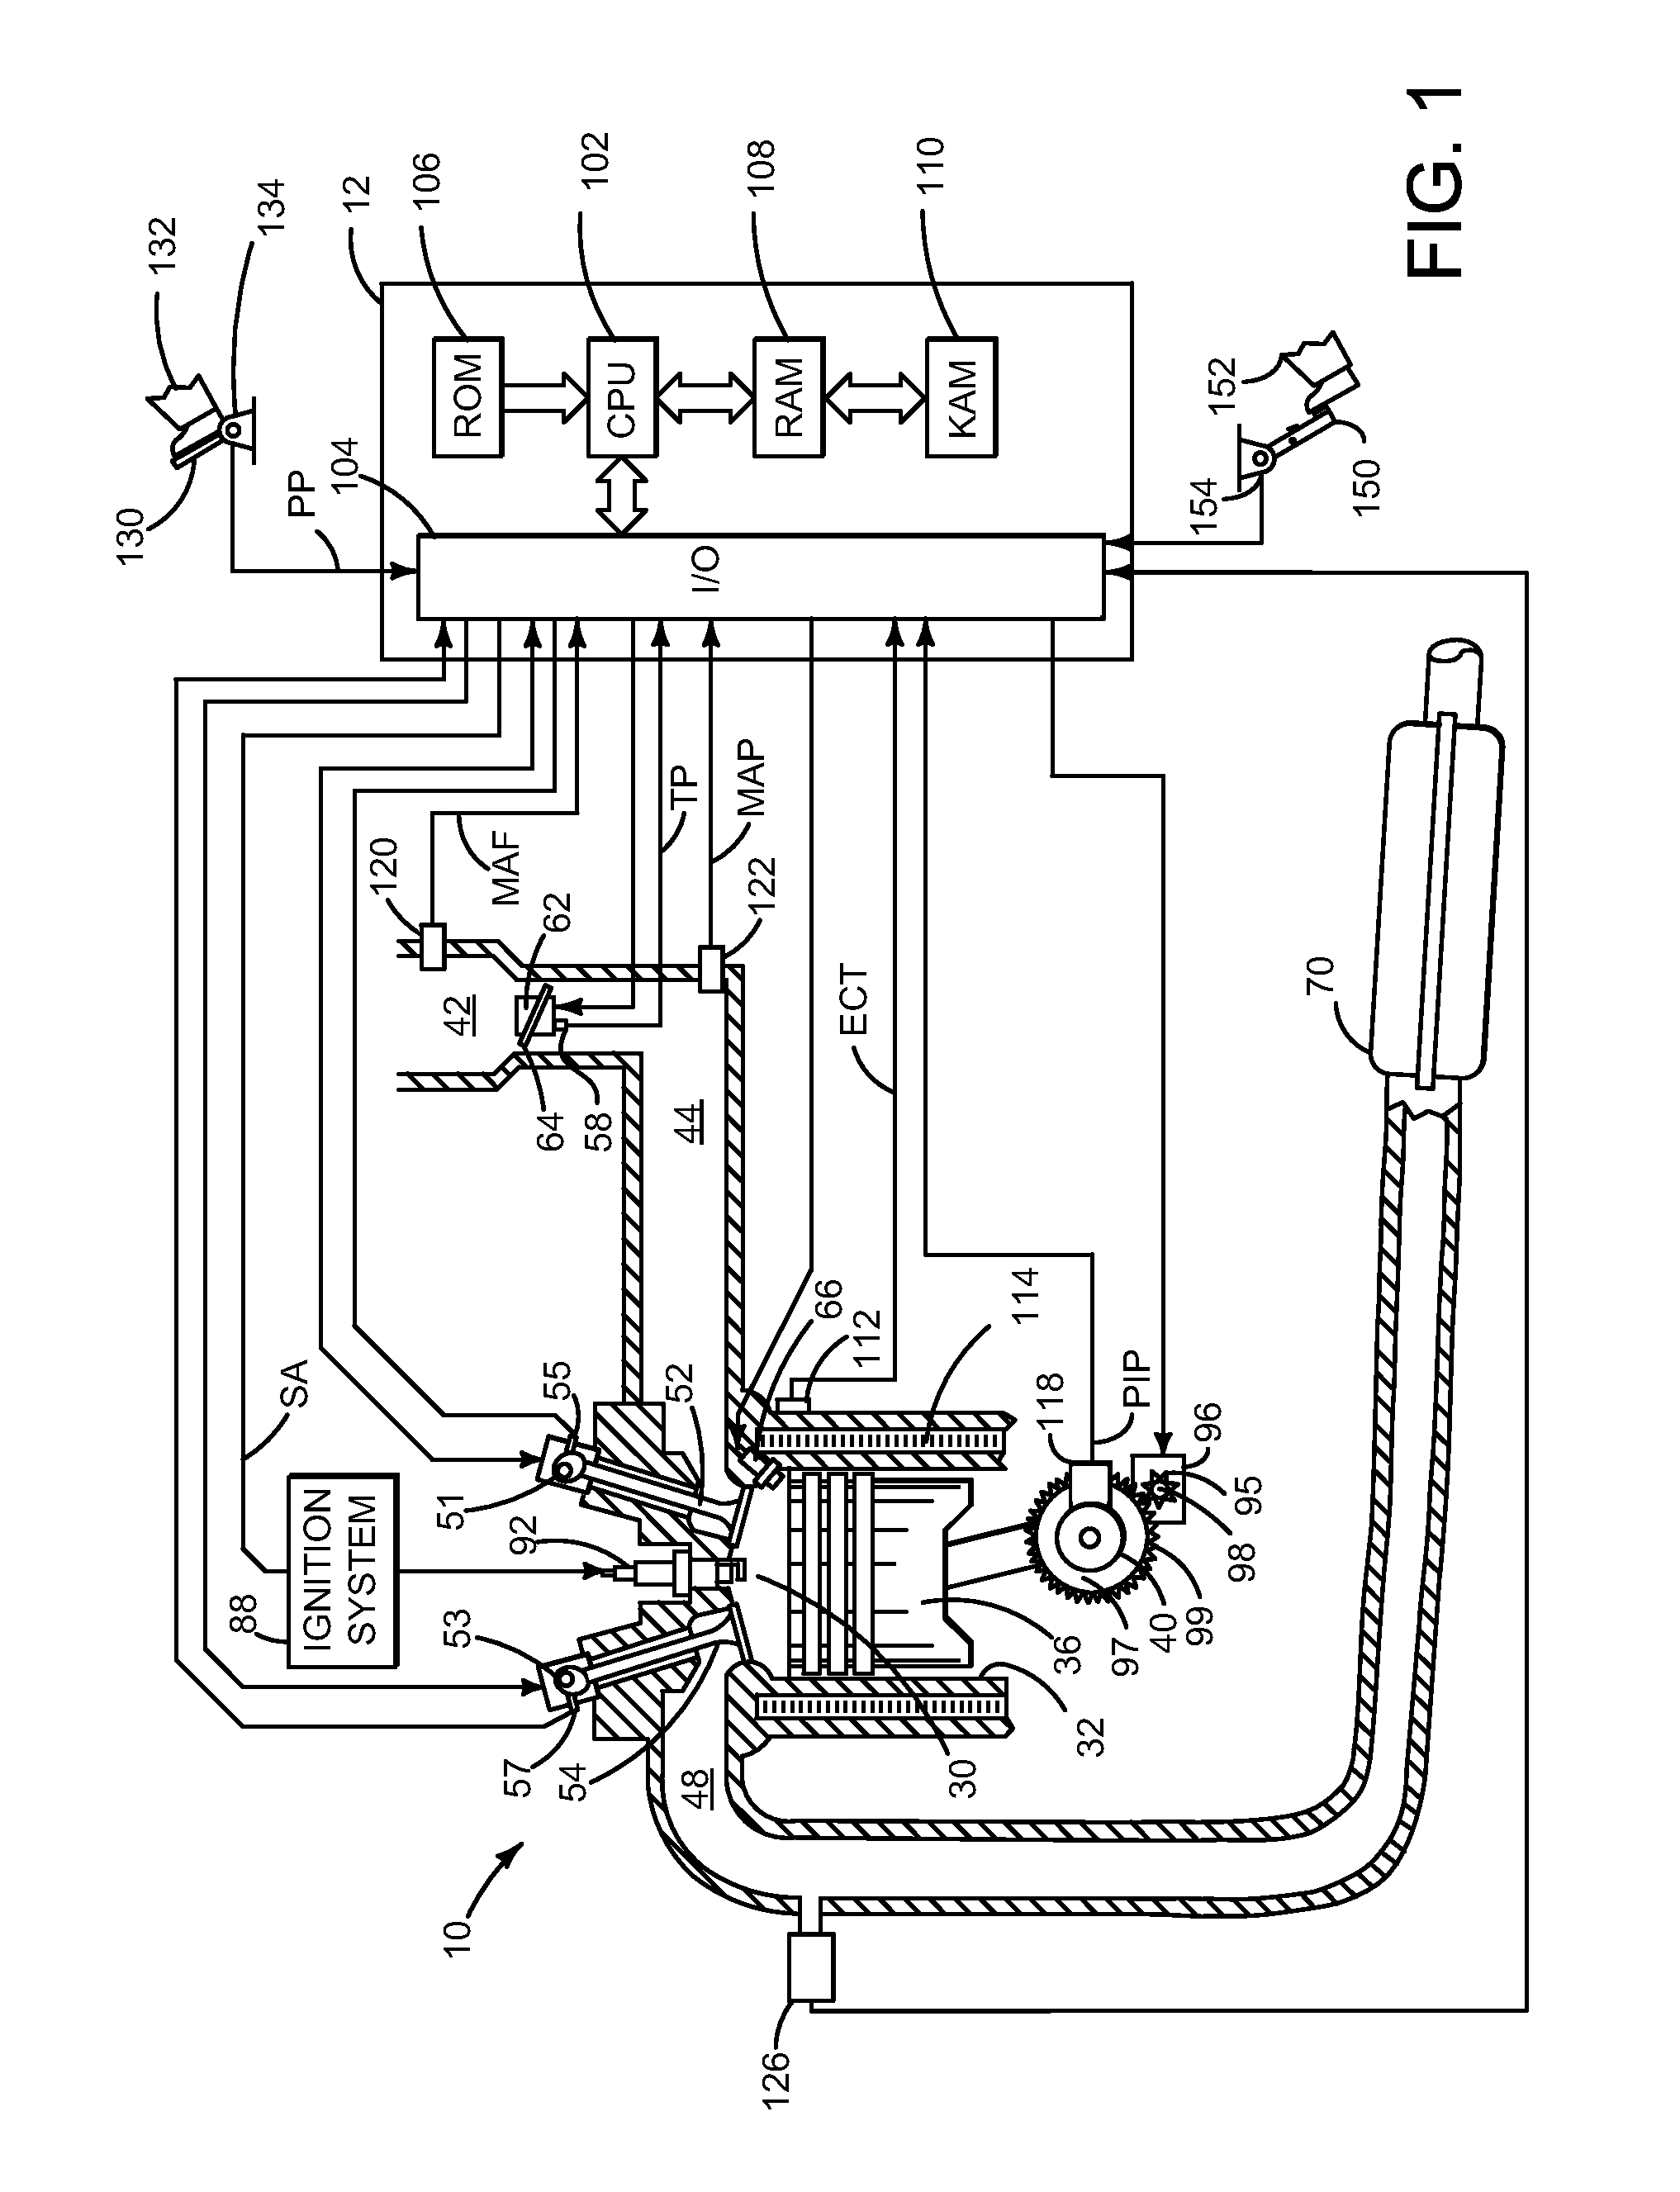 Methods and systems for operating a transmission